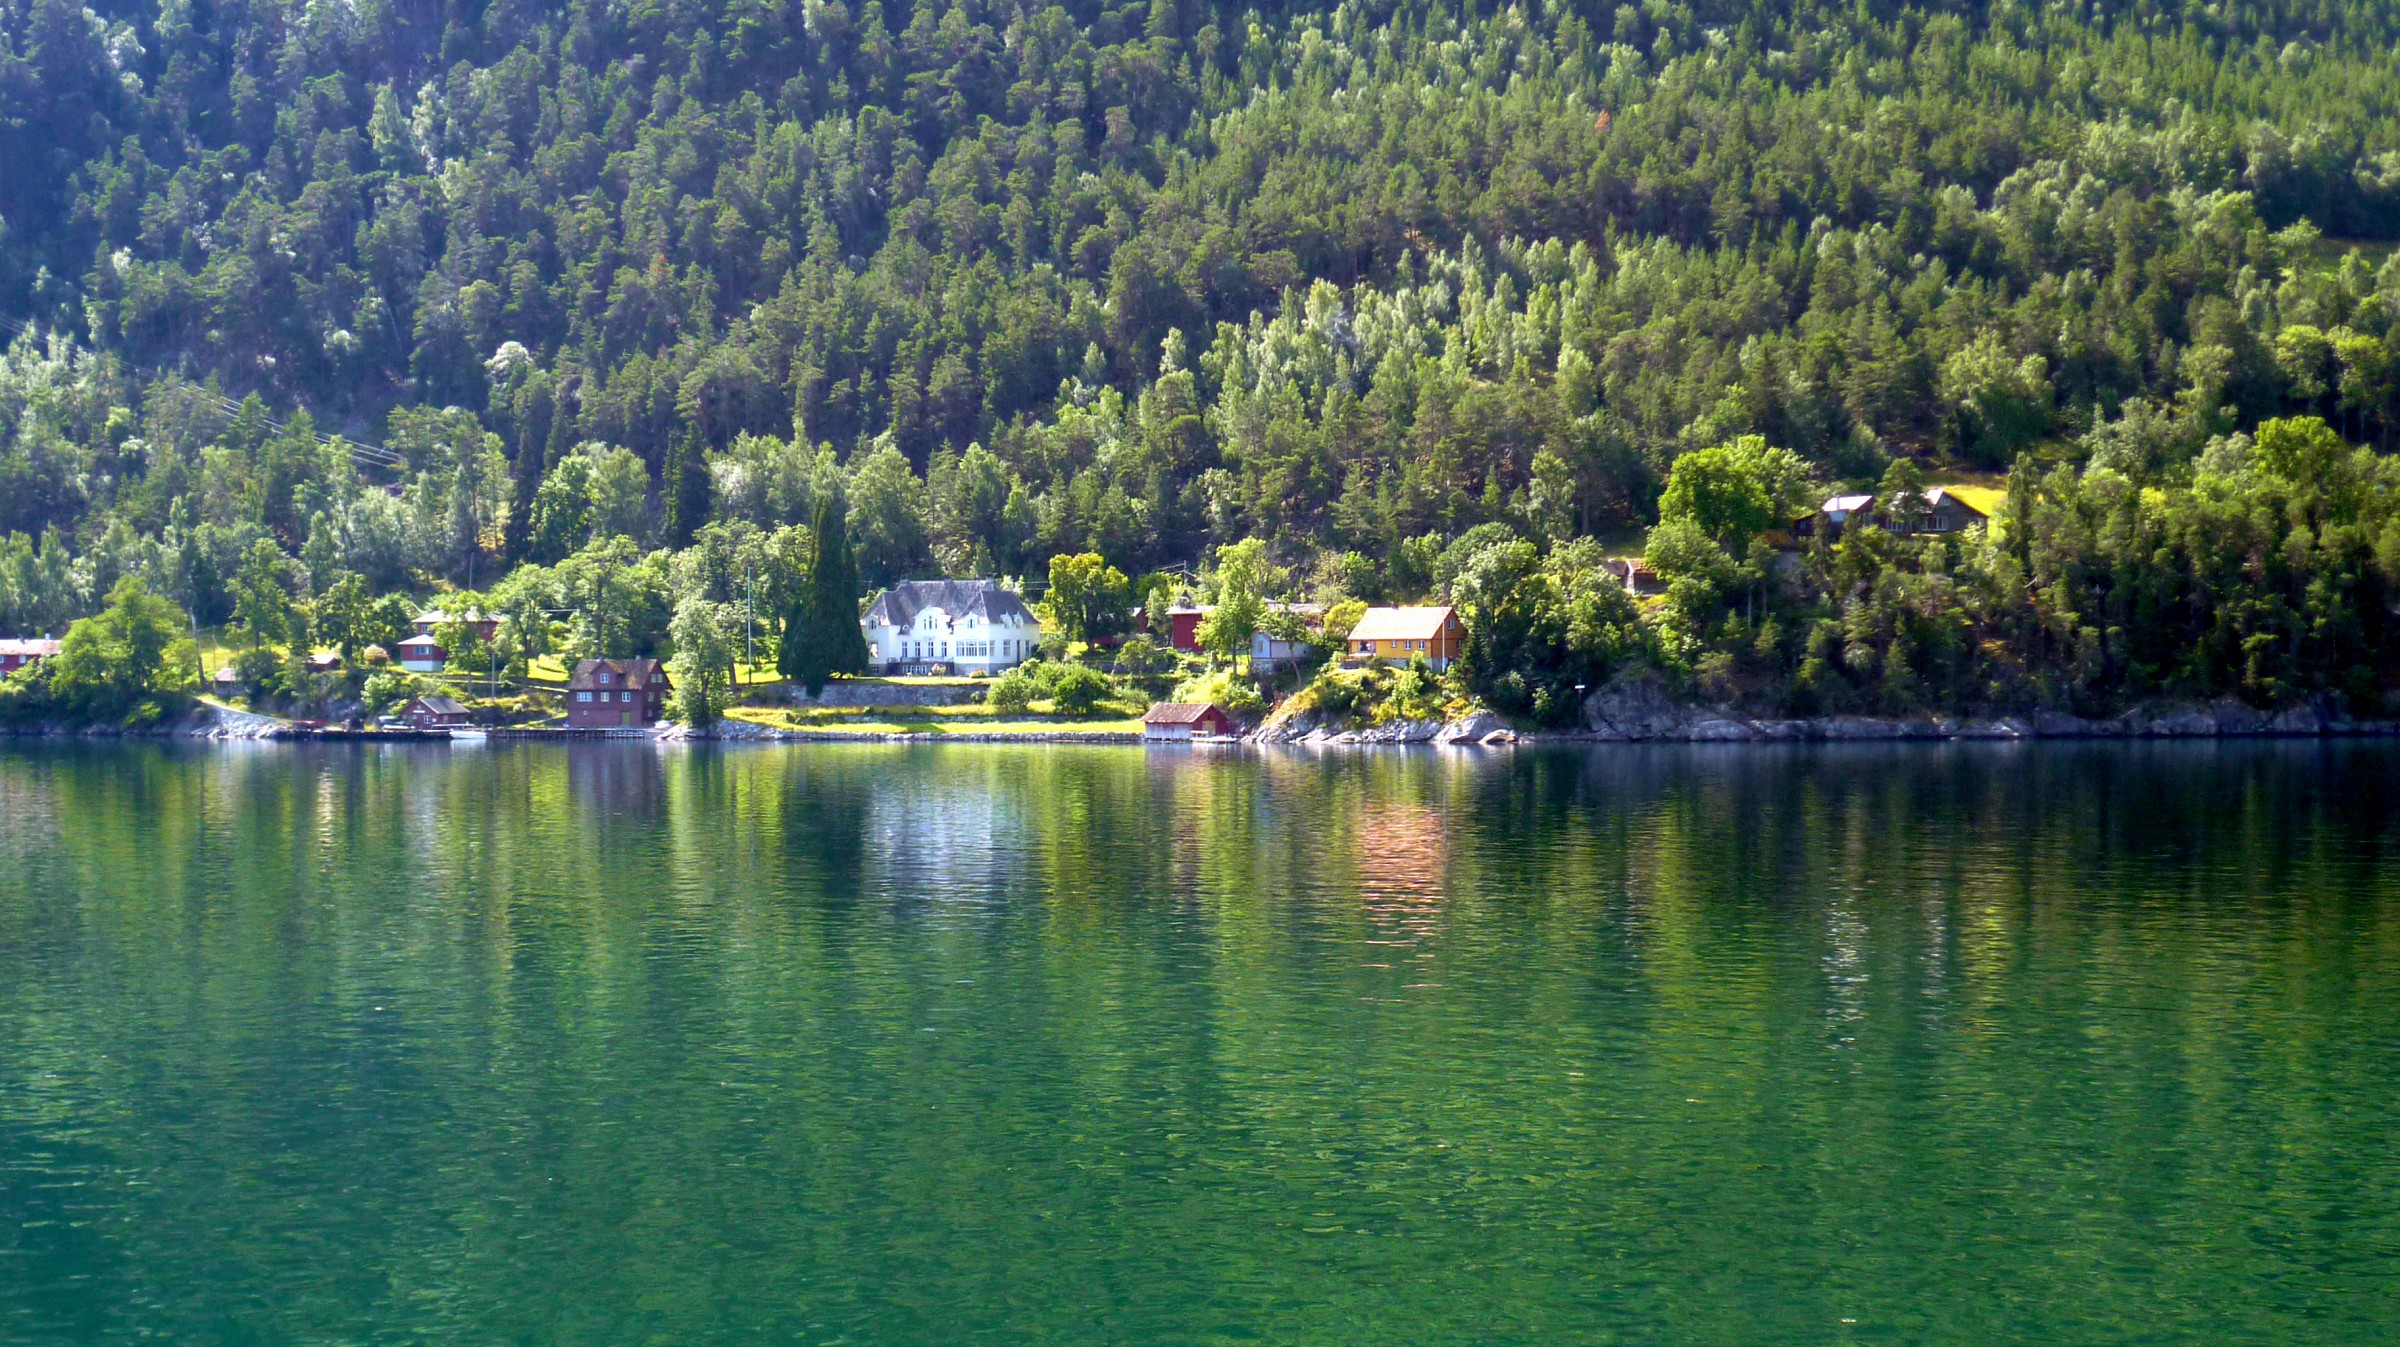 In the fjord in summer...